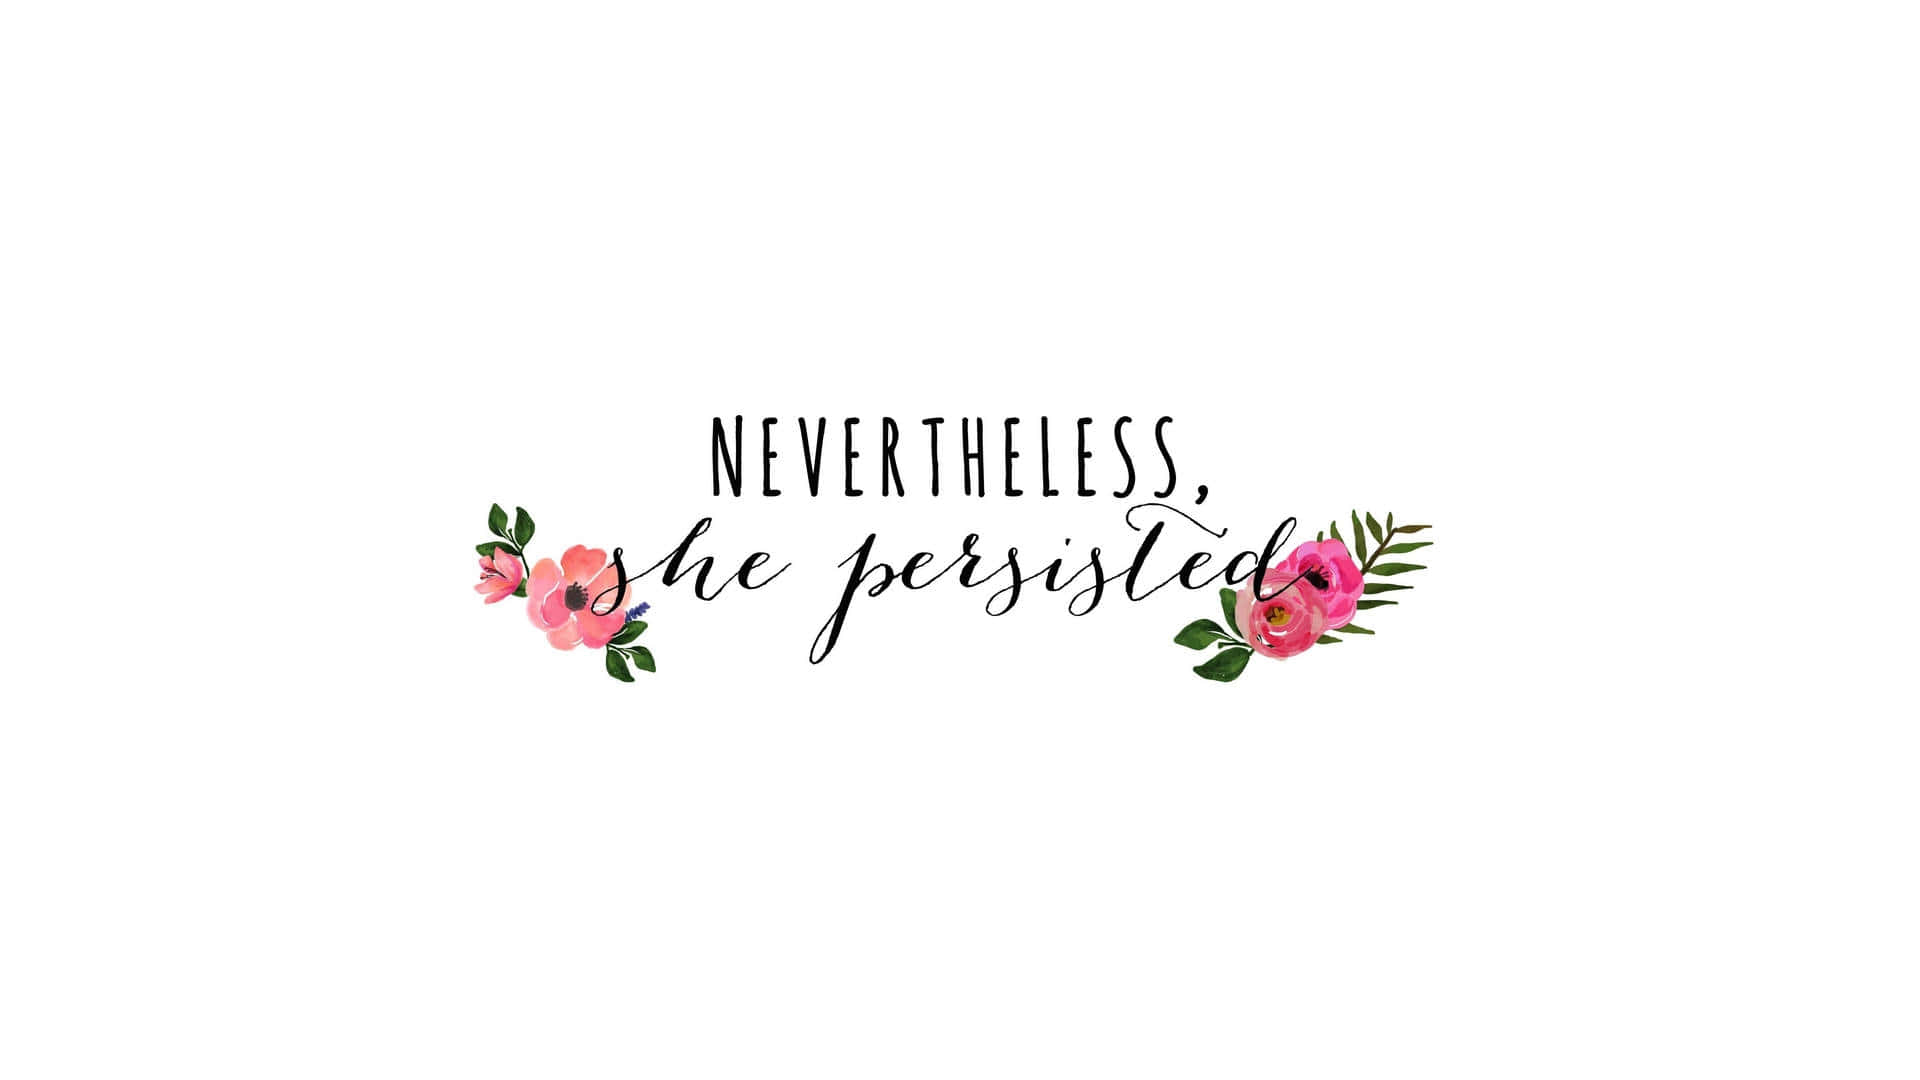 She Persisted_ Inspirational Quote Wallpaper